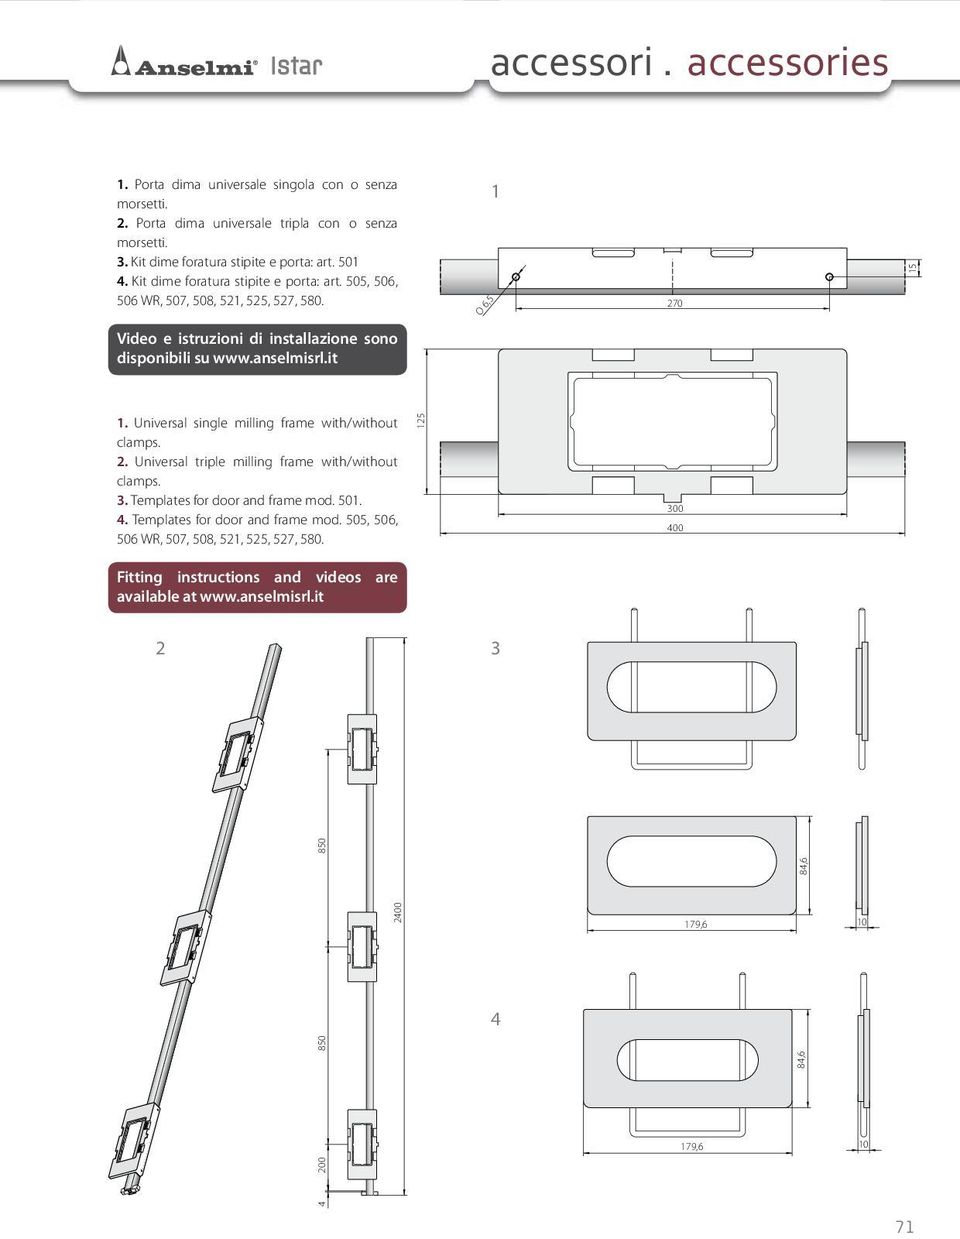 it 1. Universal single milling frame with/without clamps. 2. Universal triple milling frame with/without clamps. 3. Templates for door and frame mod. 501. 4.